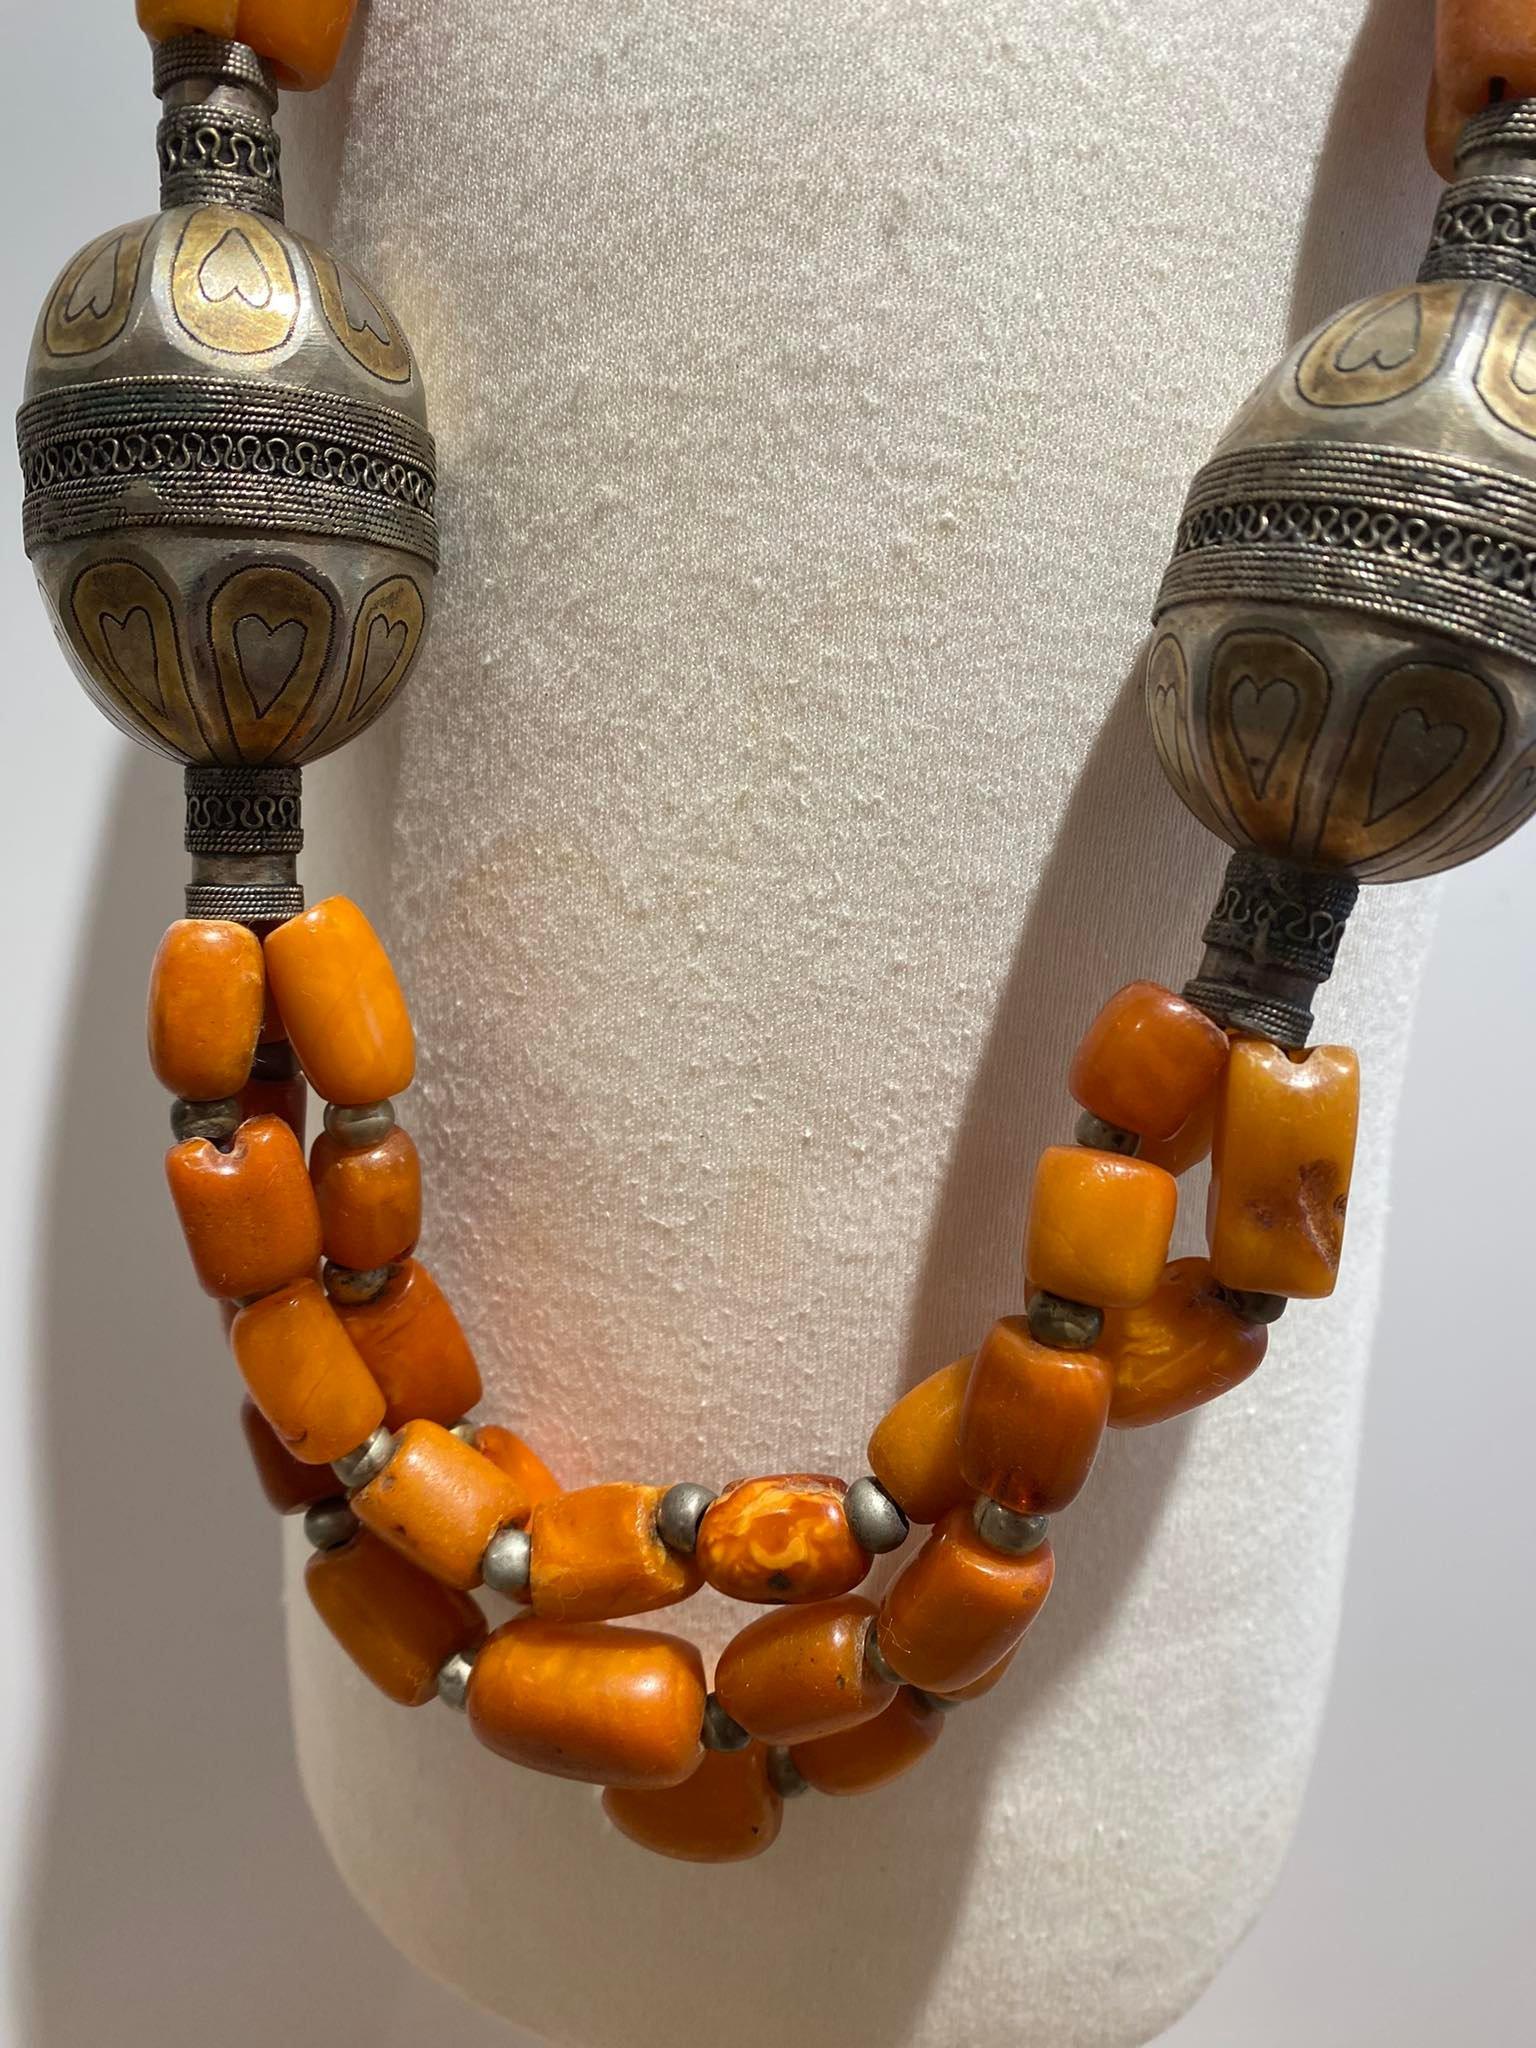  Antique Amber Necklace Yemen Afghanistan 18/19th Century Islamic Art silver  For Sale 11